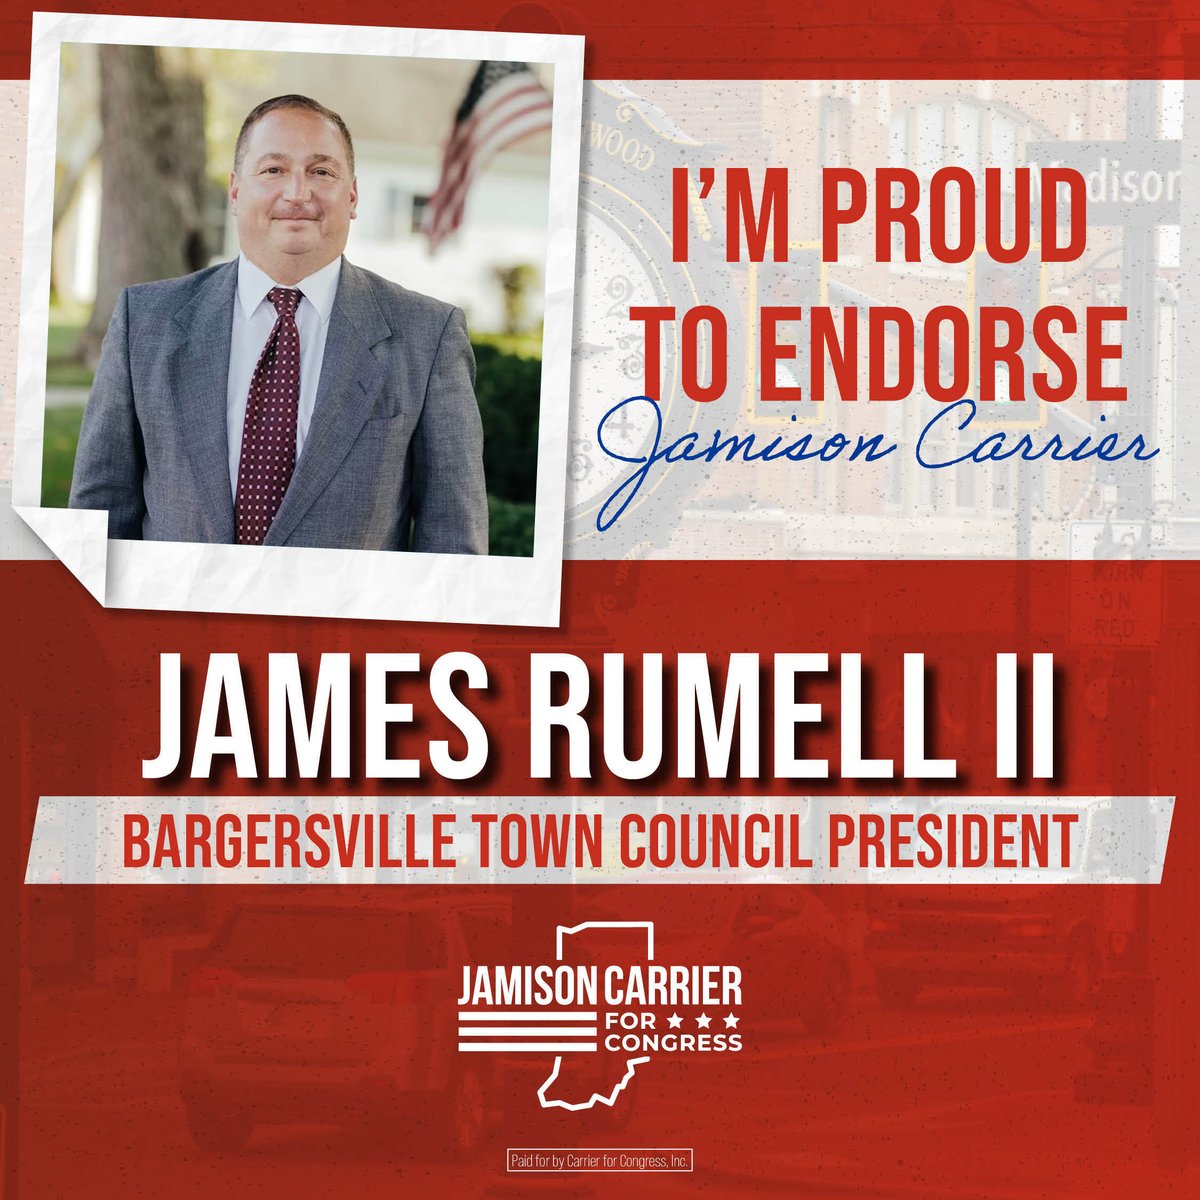 'I'm honored to endorse Jamison Carrier for Congress to replace Rep. Greg Pence, who is retiring at the end of the year. I know he is ready to fight for our conservative values in Washington and work hard for all of the constituents here in the Sixth District. Jamison is a man of